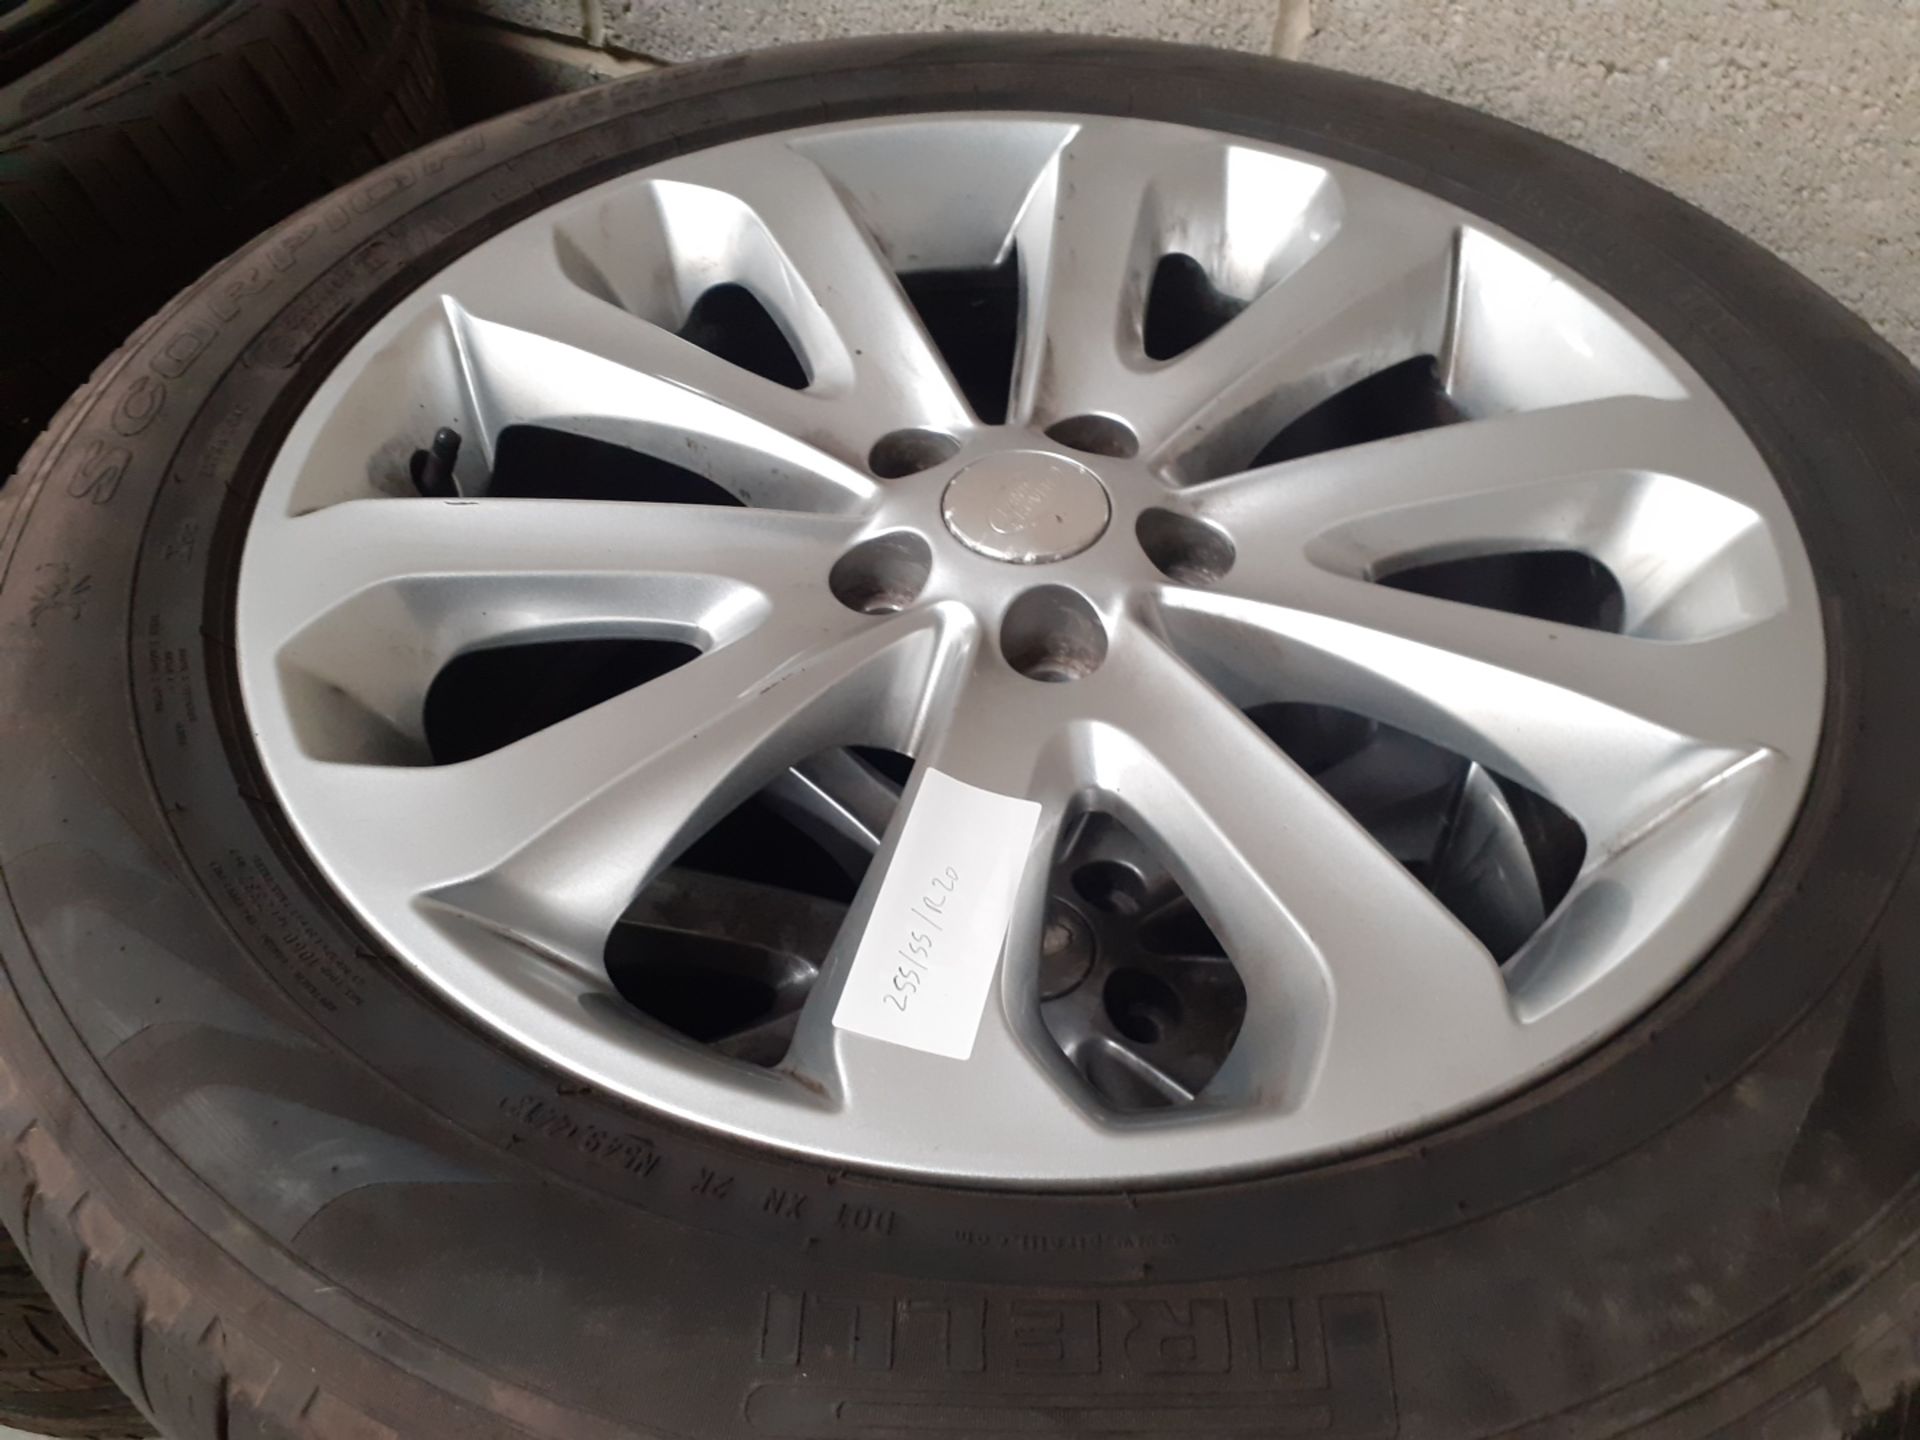 JOB LOT OF 30 SETS OF ALLOY WHEELS WITH TYRES, LAND ROVER RANGE ROVER, OVER £31K RRP *NO VAT* - Image 11 of 17